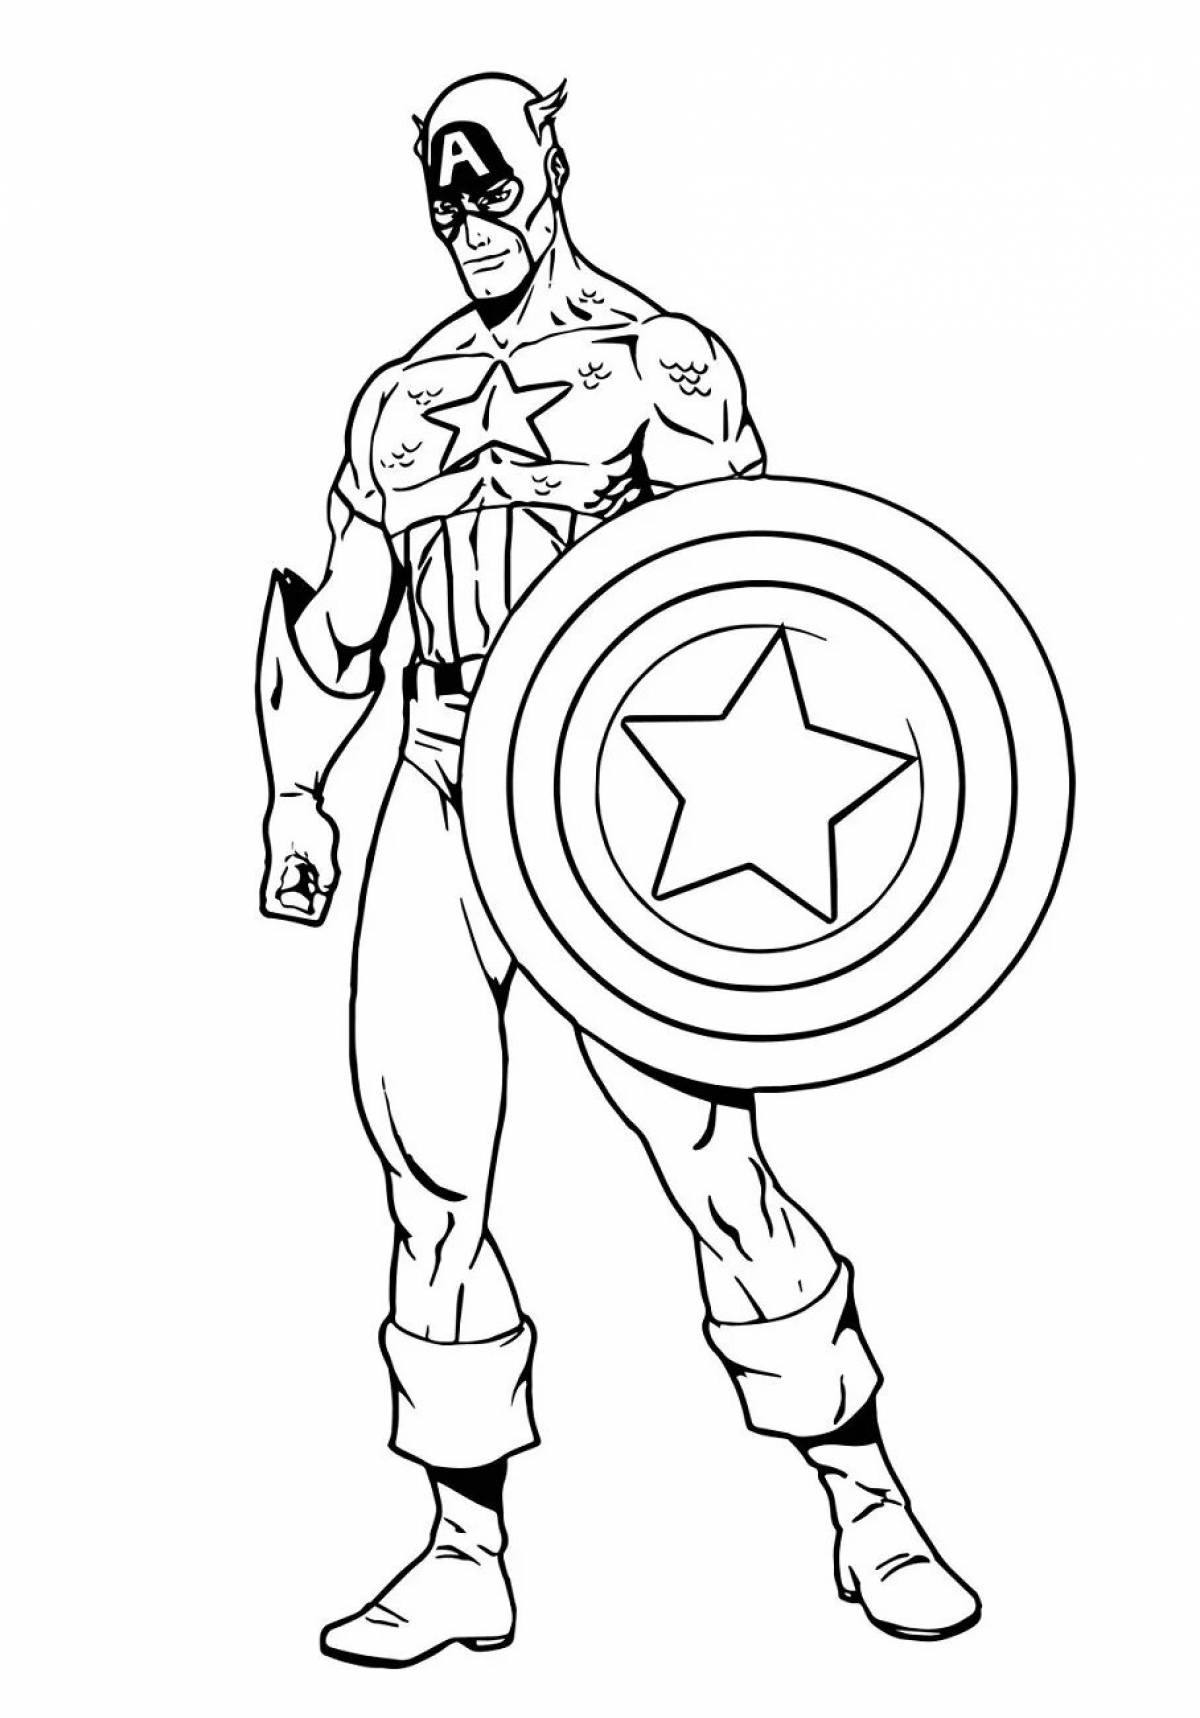 Attractive captain america coloring pages for kids